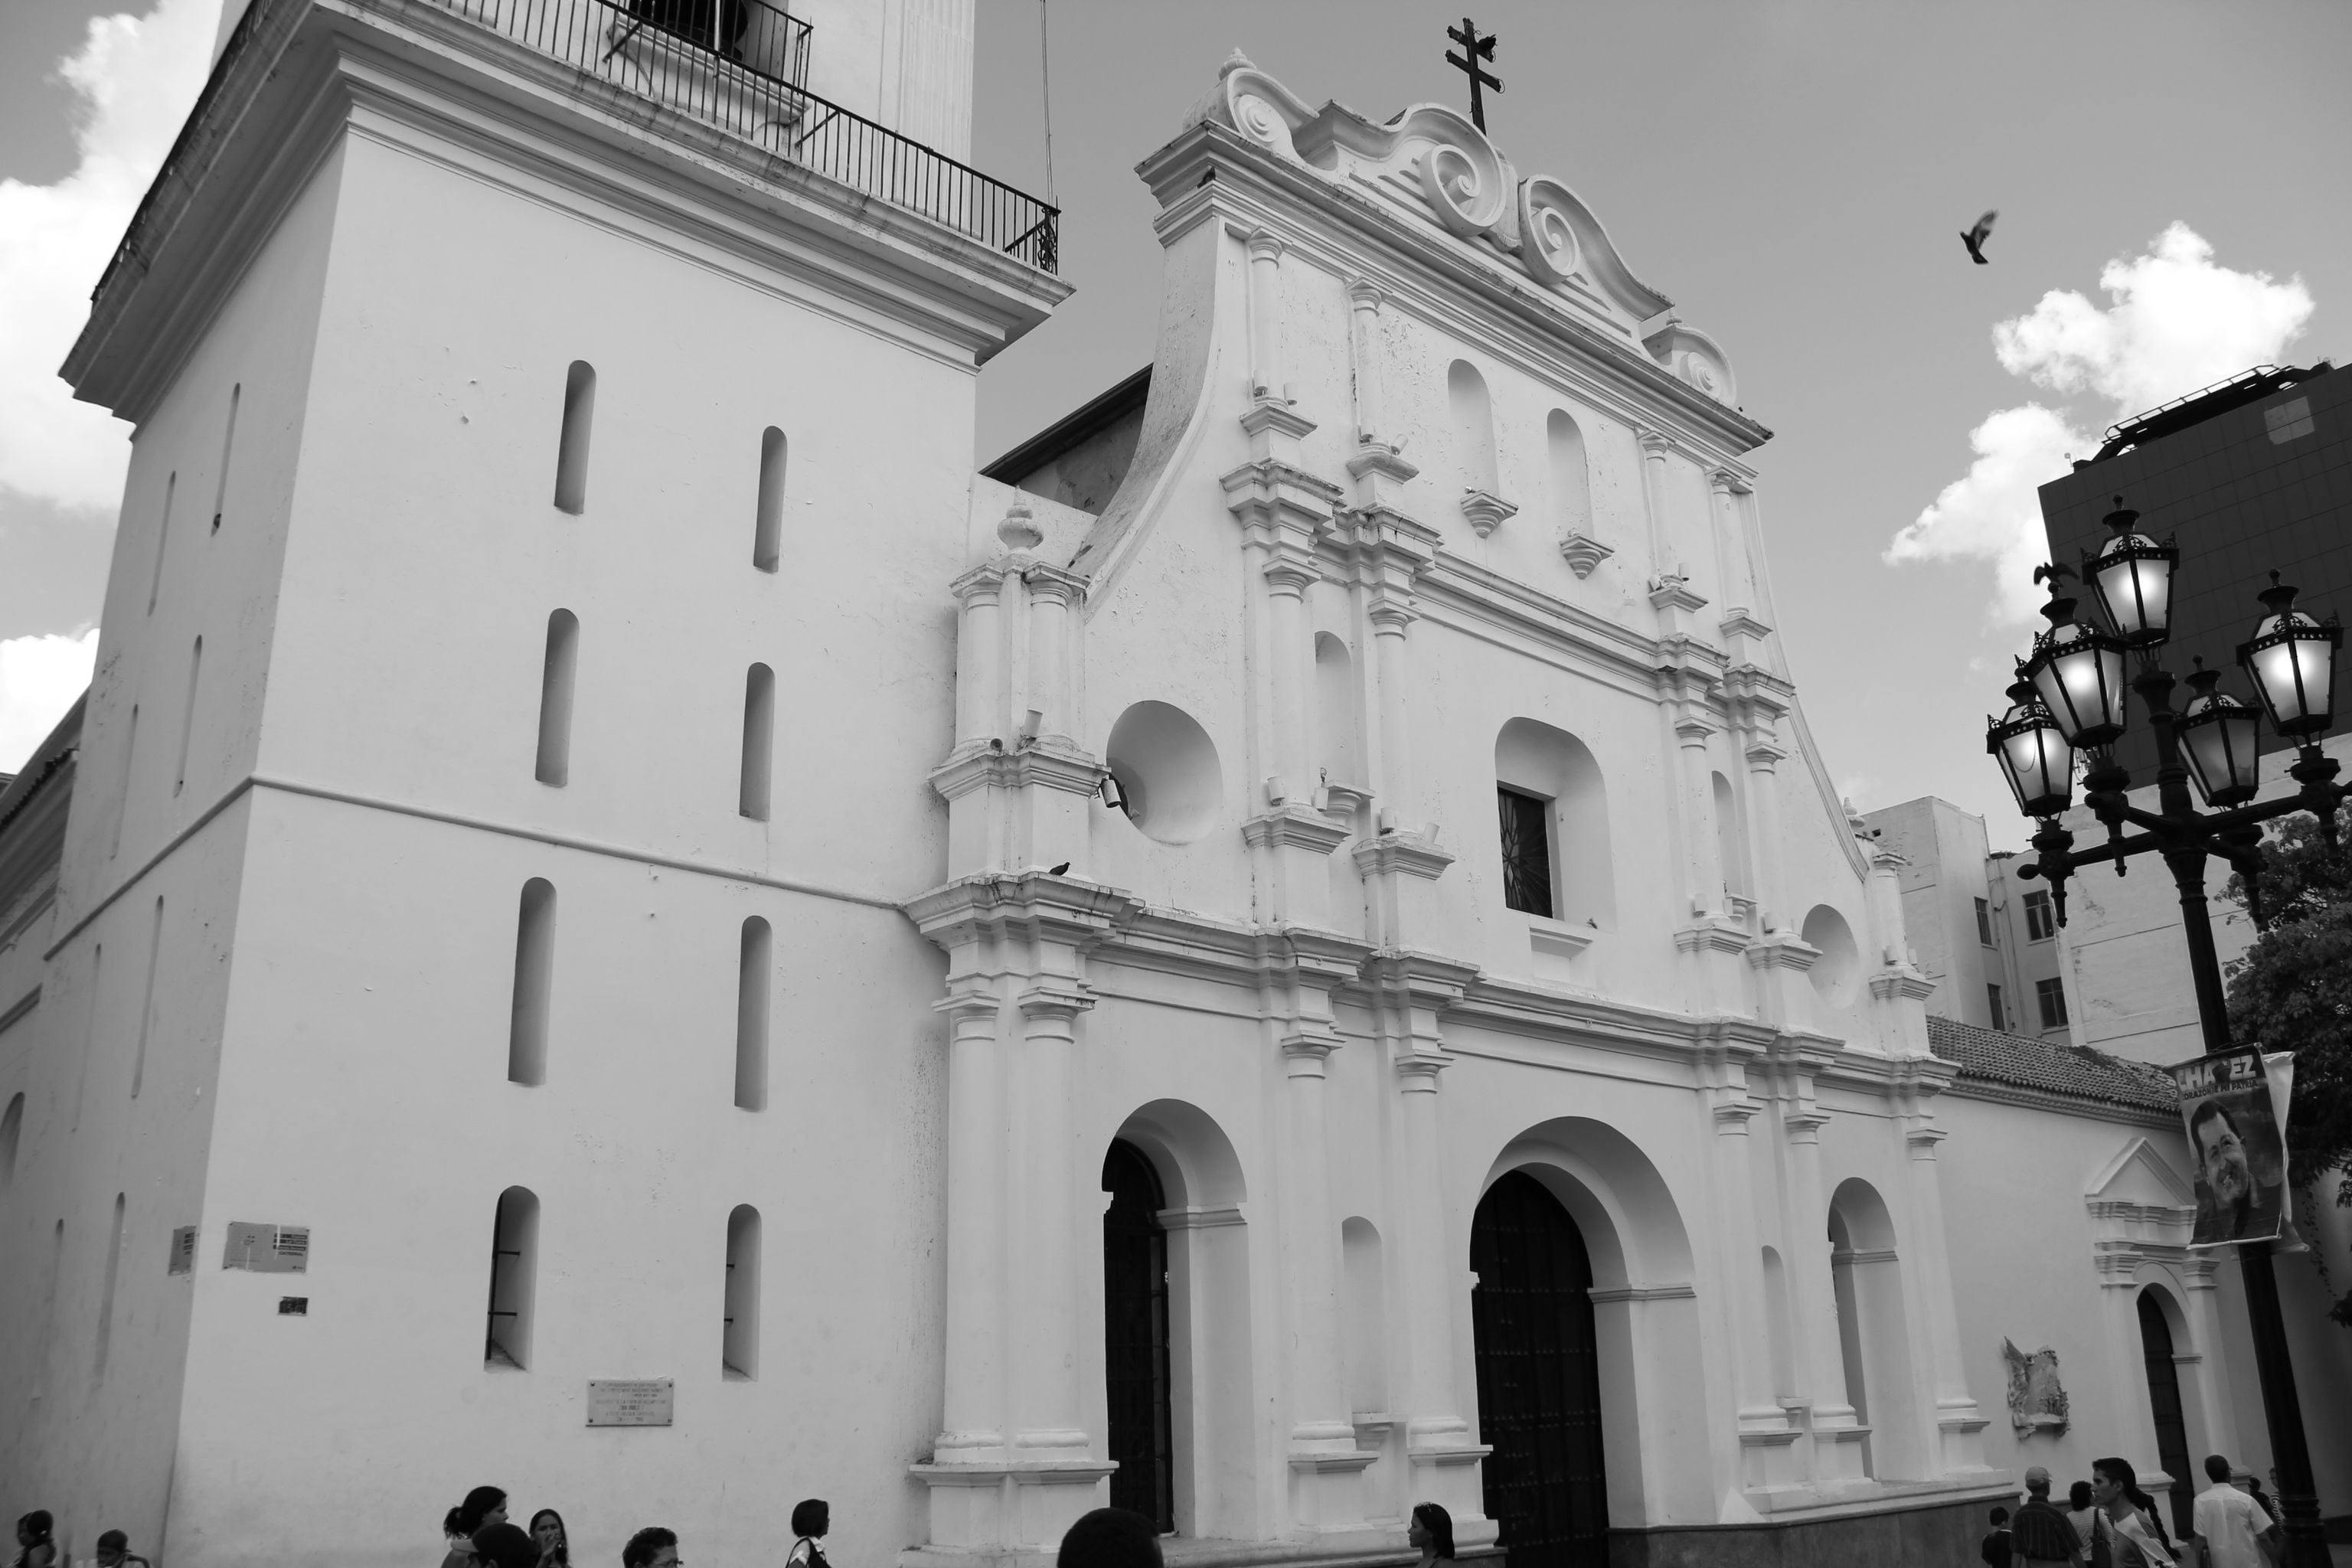 Caracas Cathedral